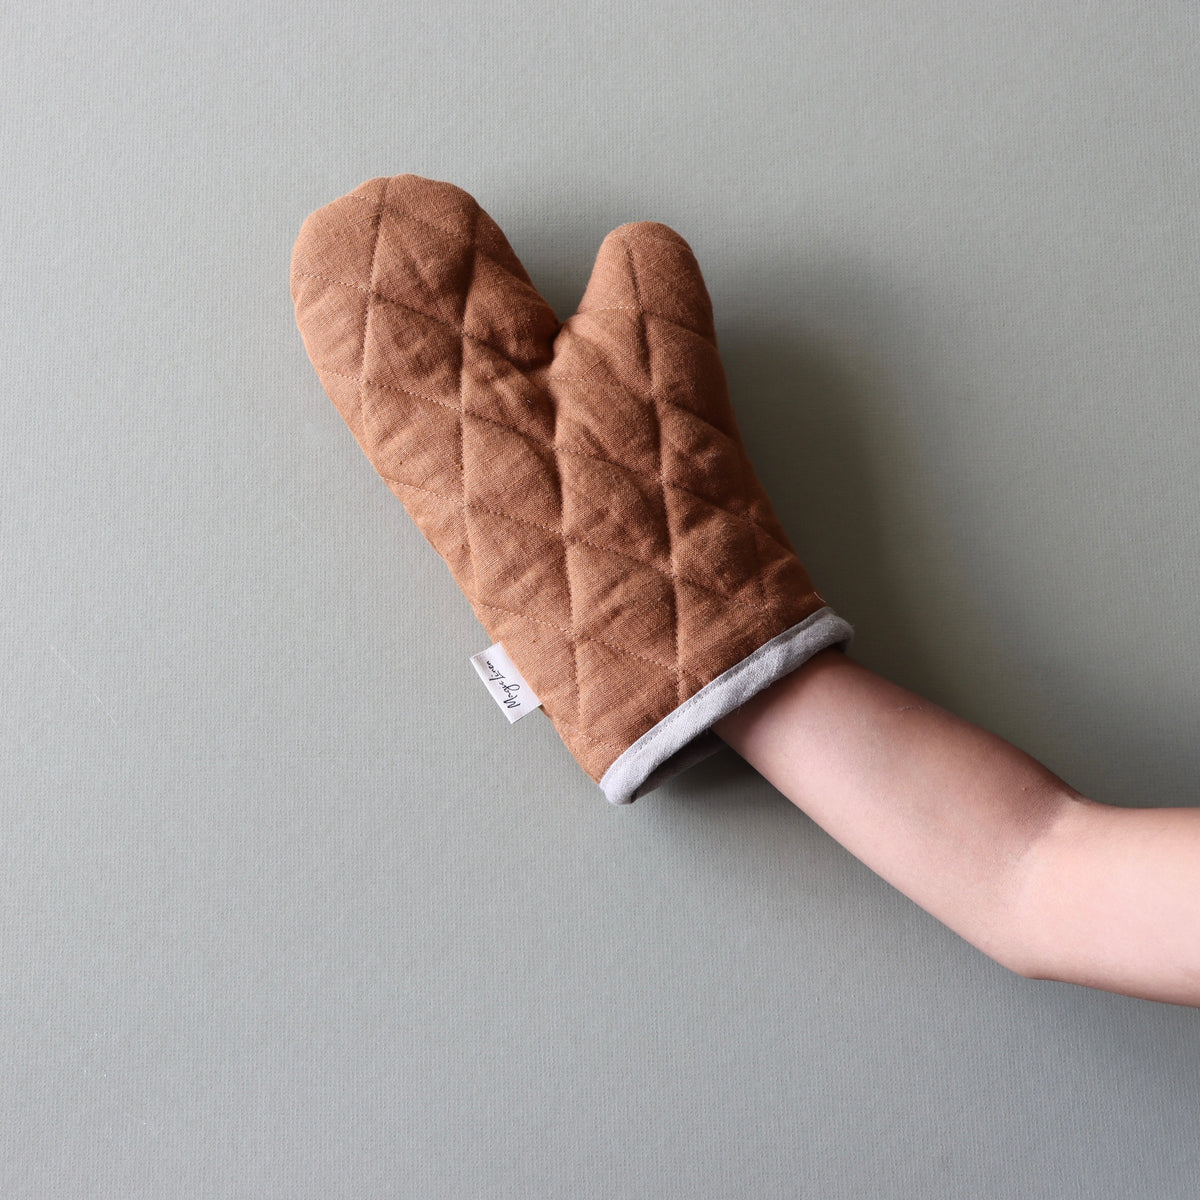 Heirloom Oven Mitts - Be Made